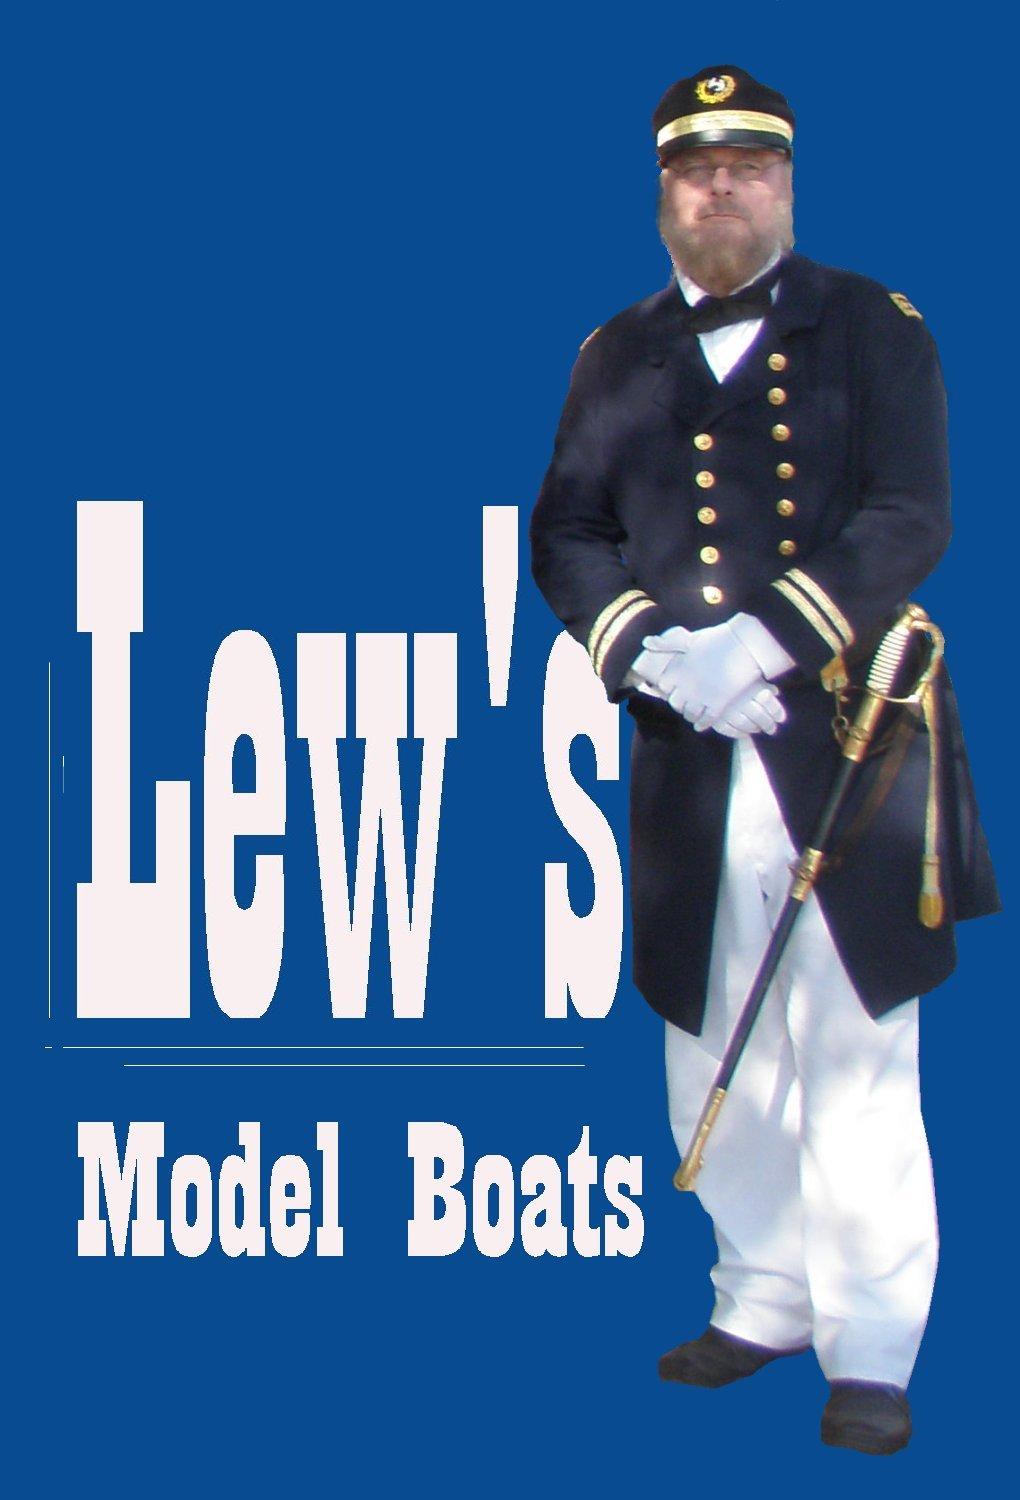 Lew Zerfas Web Site: LewsModelBoats.org Email: info@lewsmodelboat.org Phone: 727-698-4400 a builder of scale model operating boats, including kits, highly modified kits, and scratch built models.